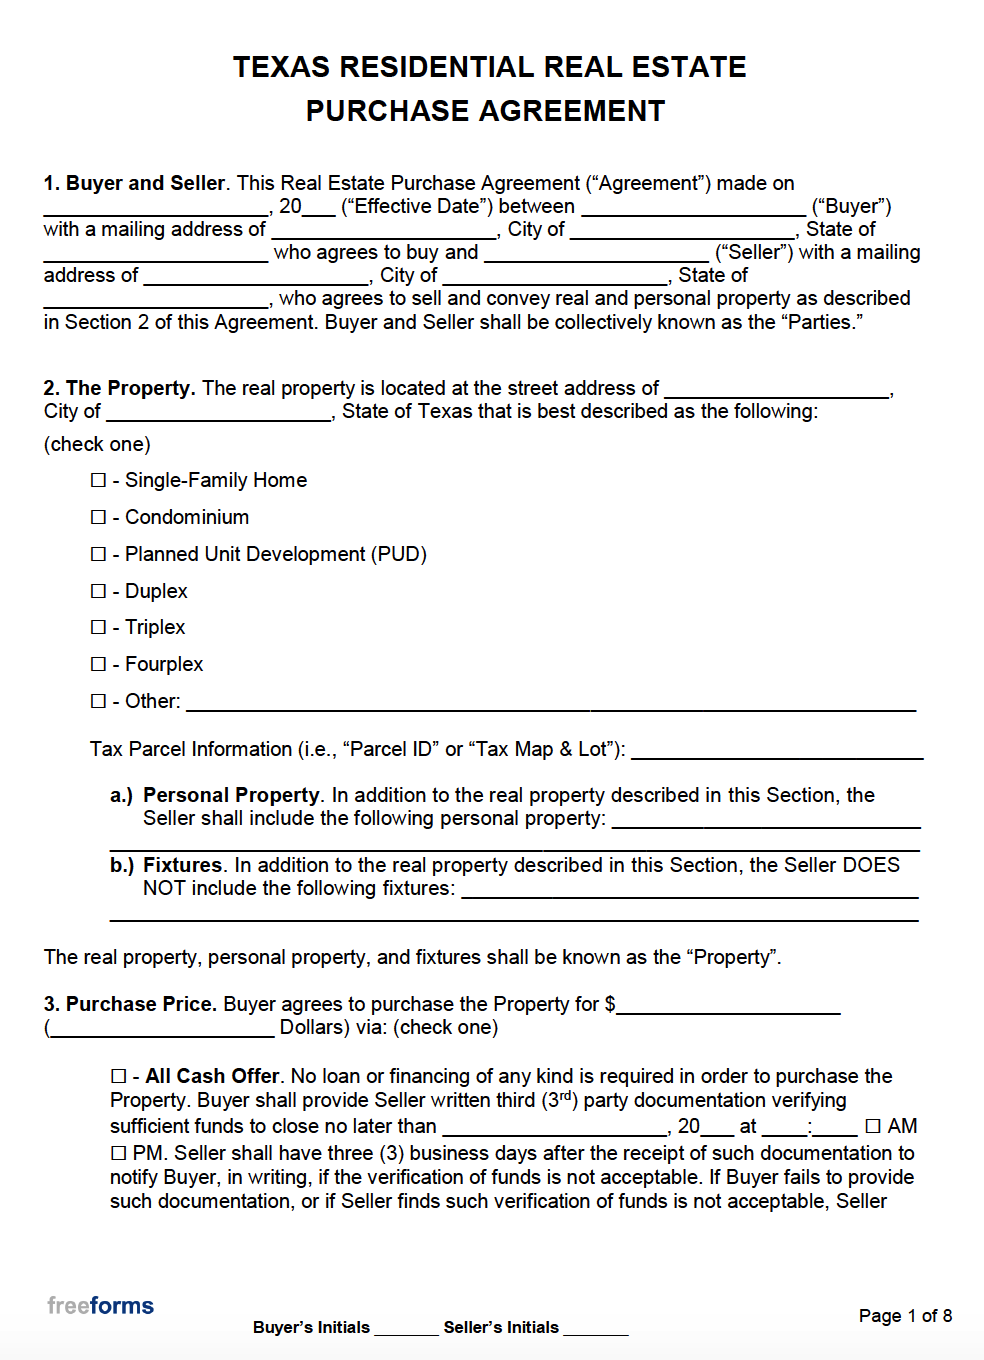 Texas Residential Real Estate Purchase Agreement 